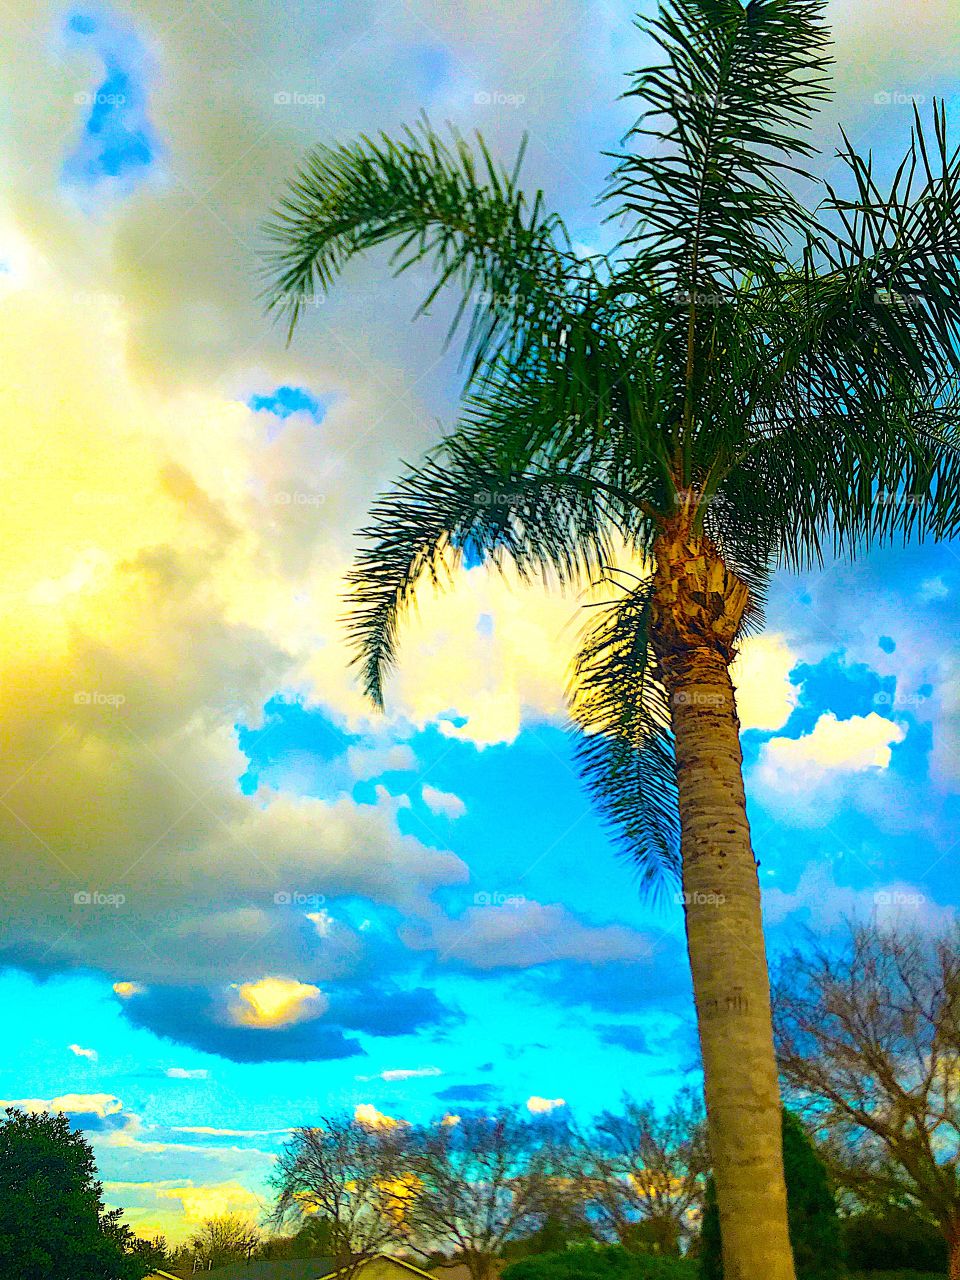 Sunshine, cloud bank, palm tree, silhouette, Florida sunset with blue sky and white clouds 